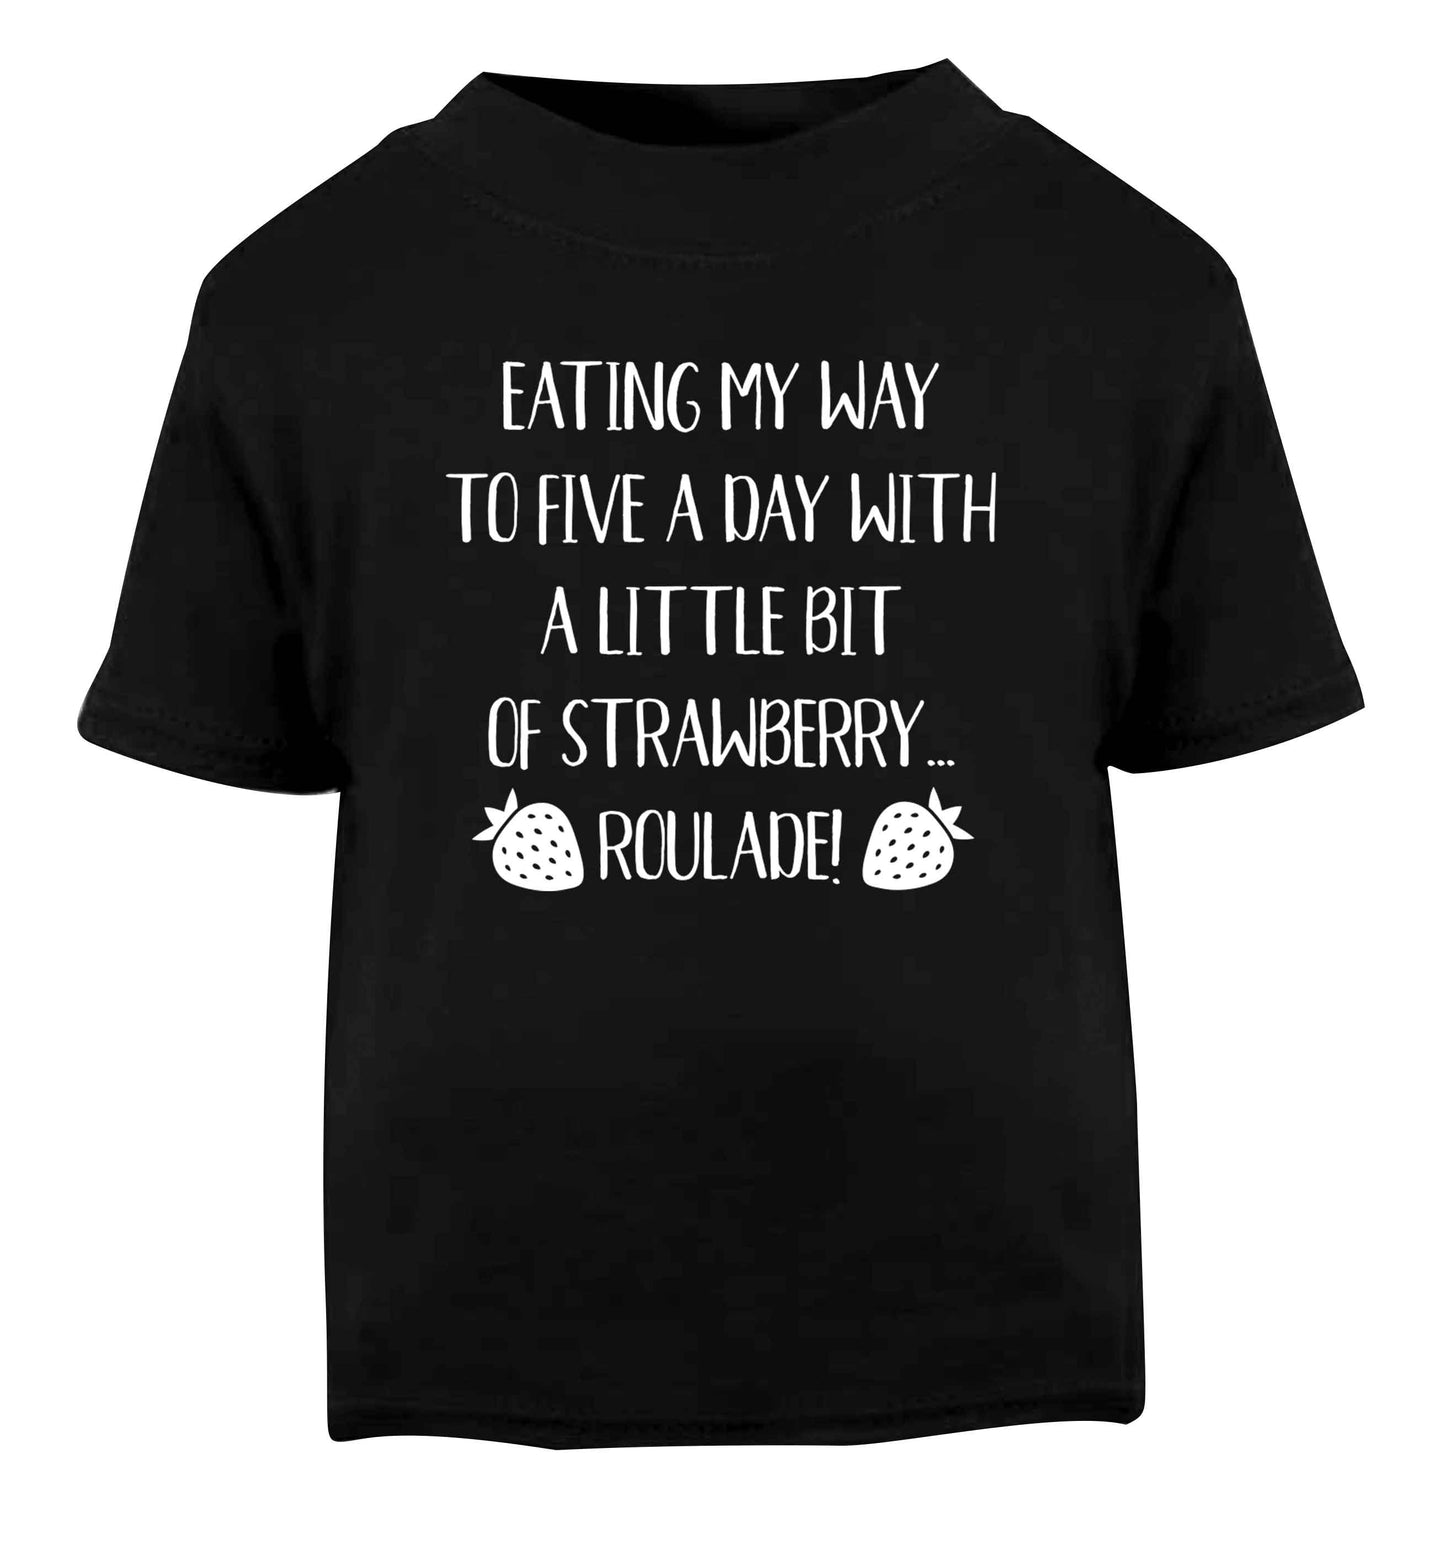 Eating my way to five a day with a little bit of strawberry roulade Black Baby Toddler Tshirt 2 years